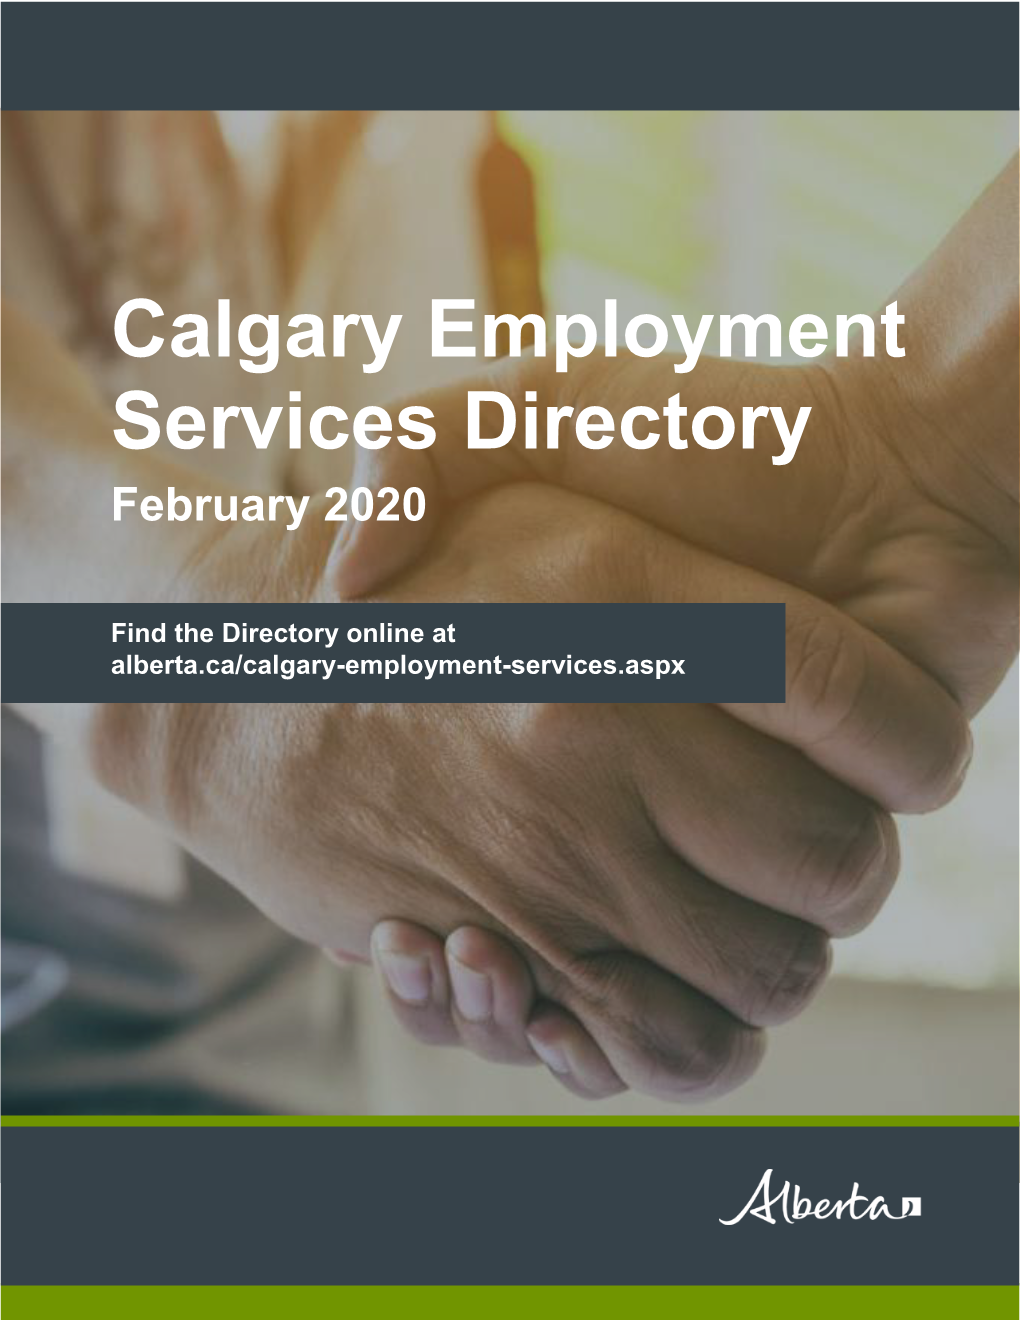 Calgary Employment Services Directory February 2020